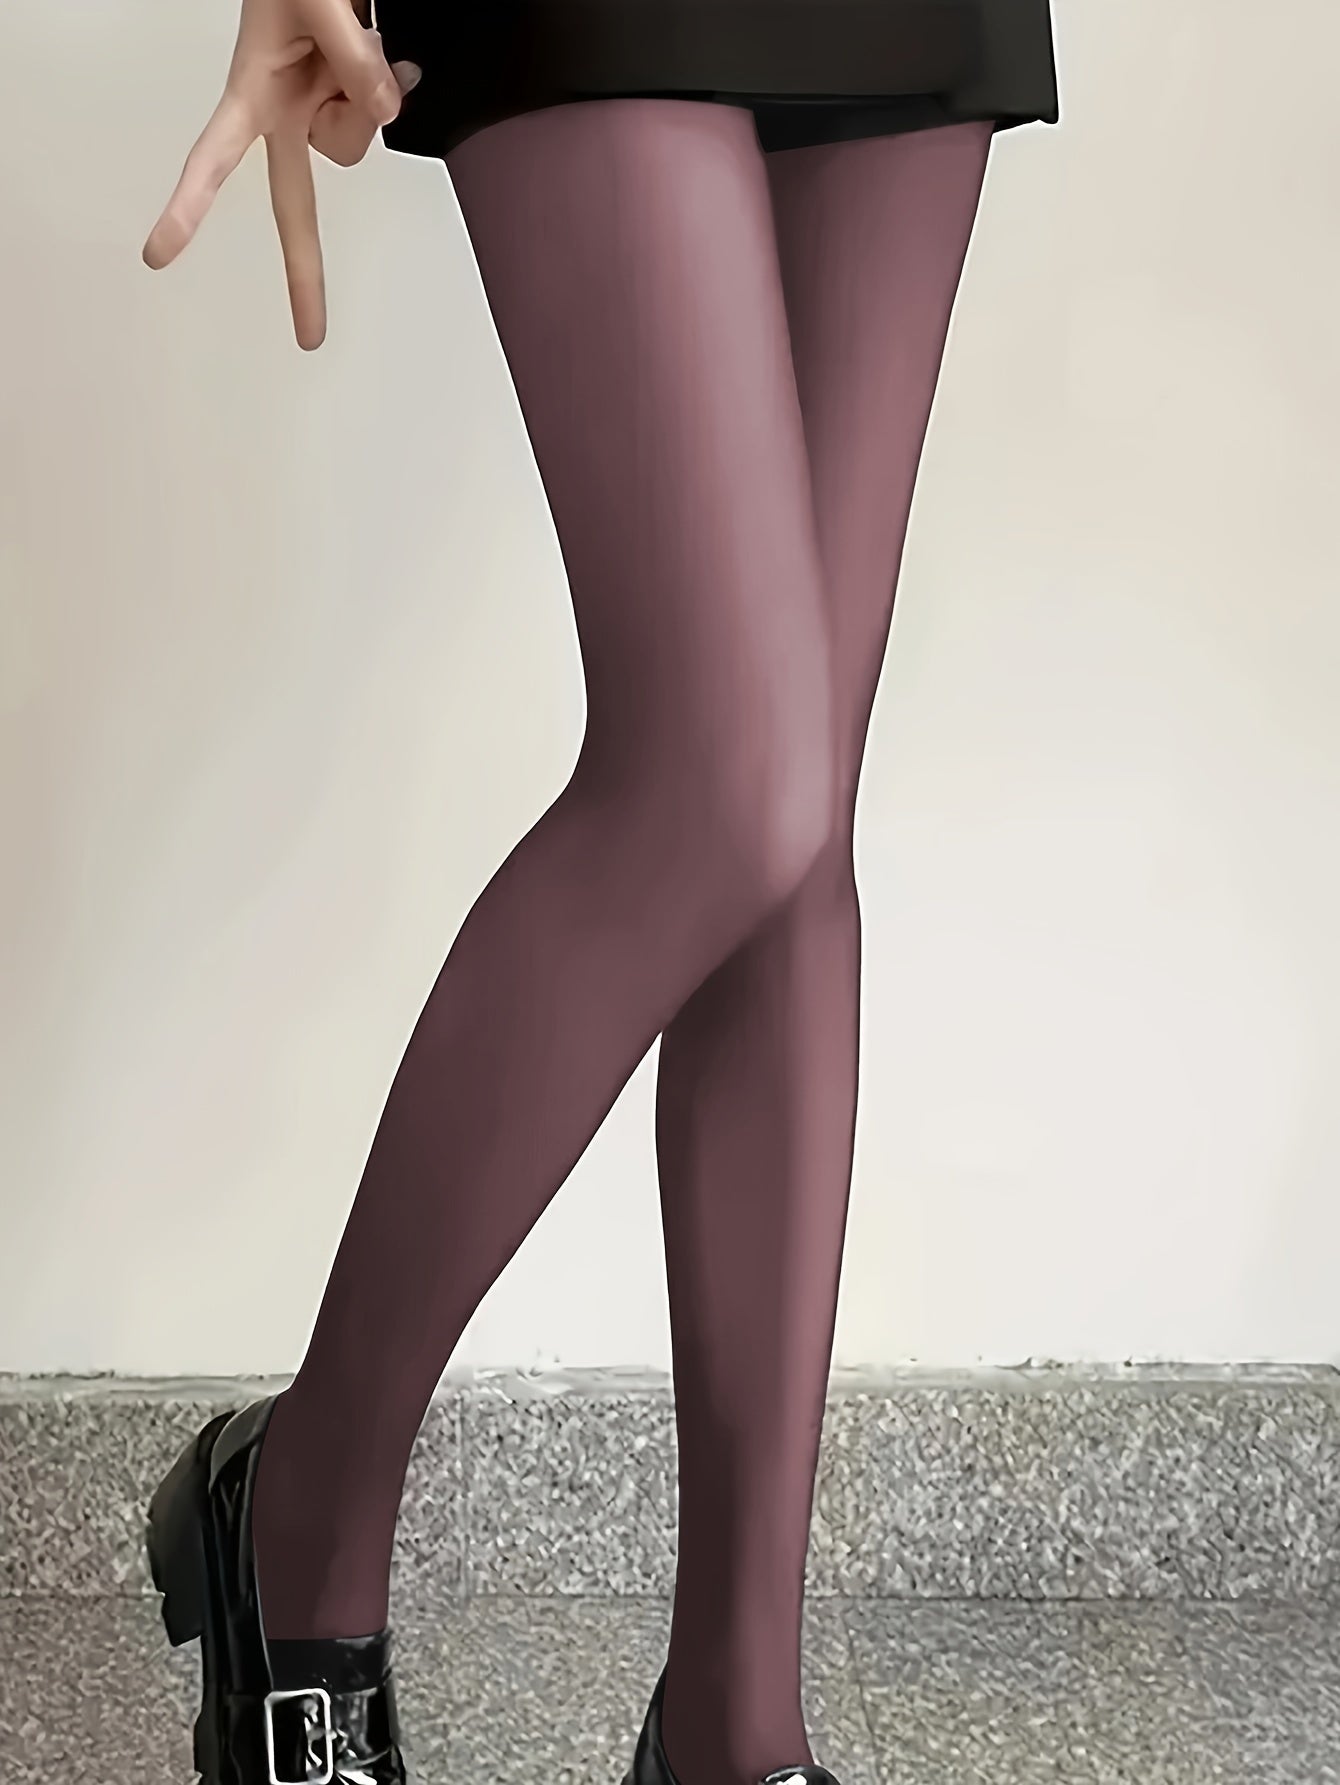 Girlfairy - Thickened Thermal Pants, Soft & Comfy Slim Elastic Tights For Winter, Women's Lingerie & Sleepwear